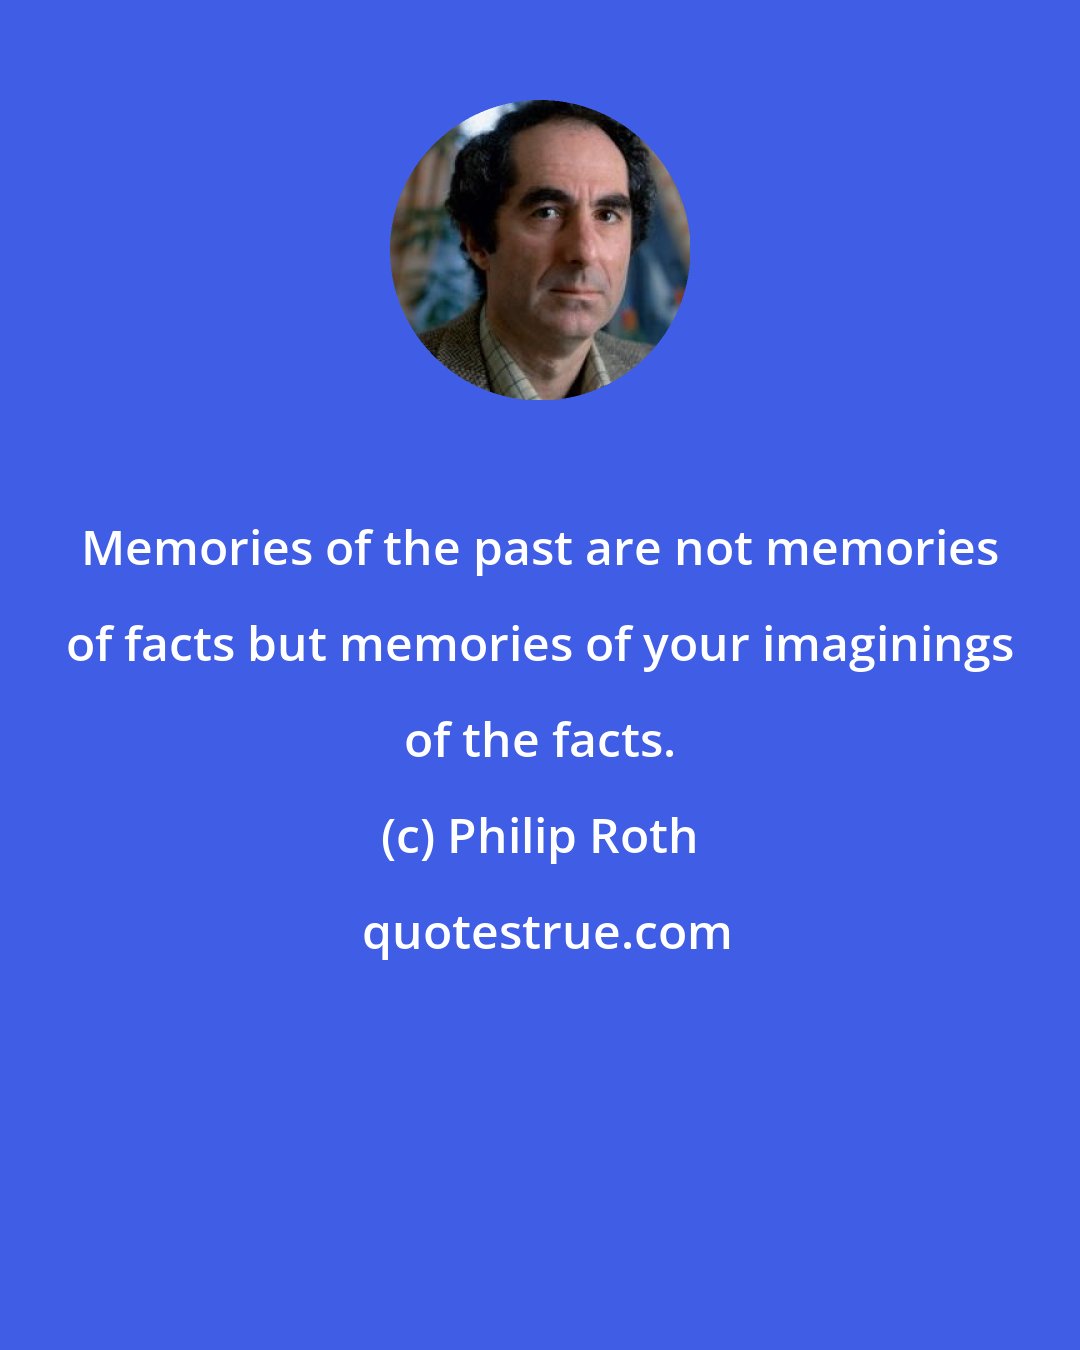 Philip Roth: Memories of the past are not memories of facts but memories of your imaginings of the facts.